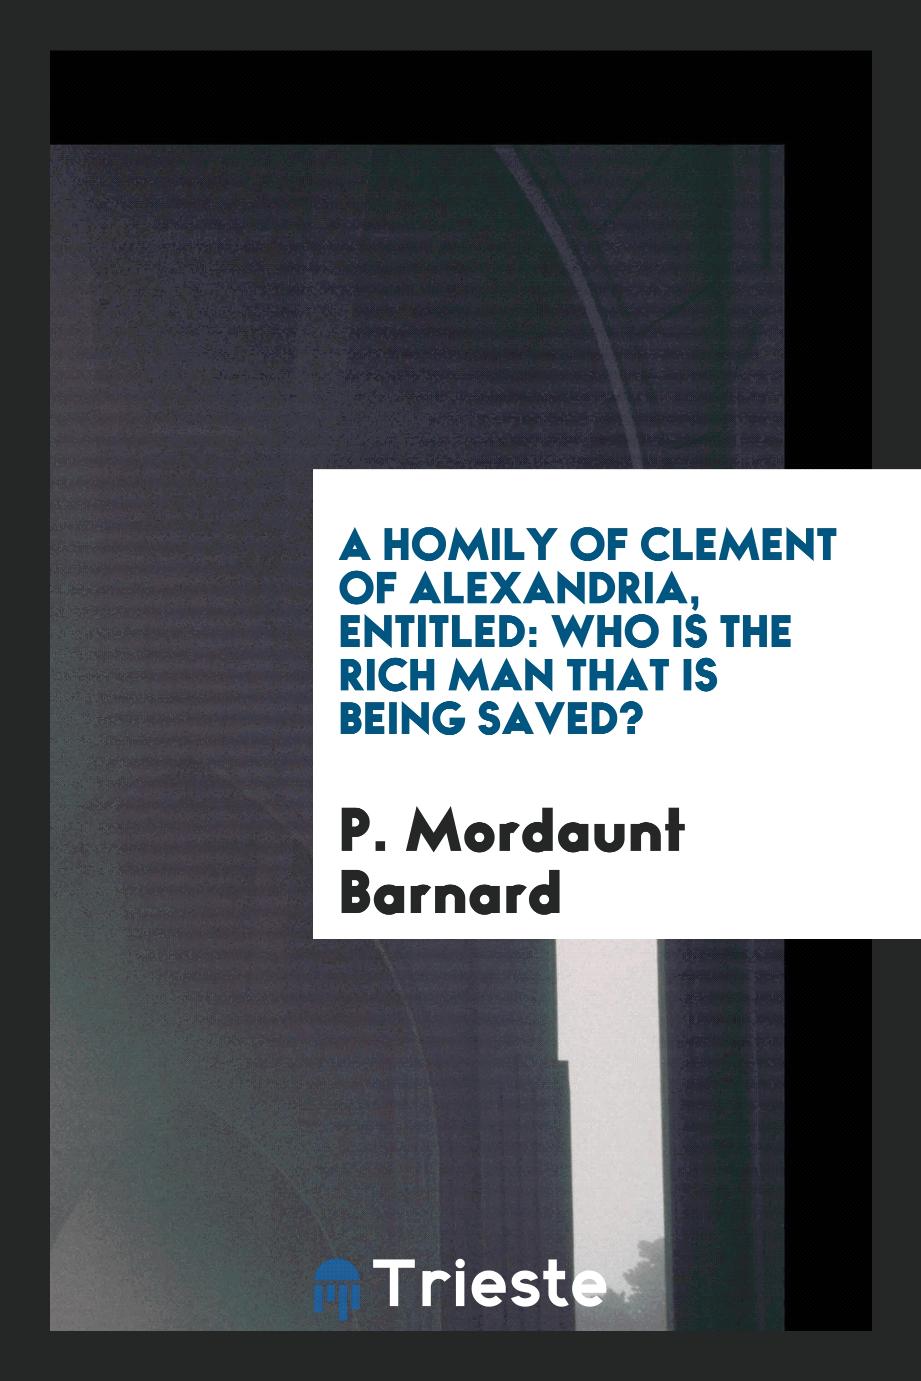 A Homily of Clement of Alexandria, Entitled: Who is the Rich Man that is being saved?